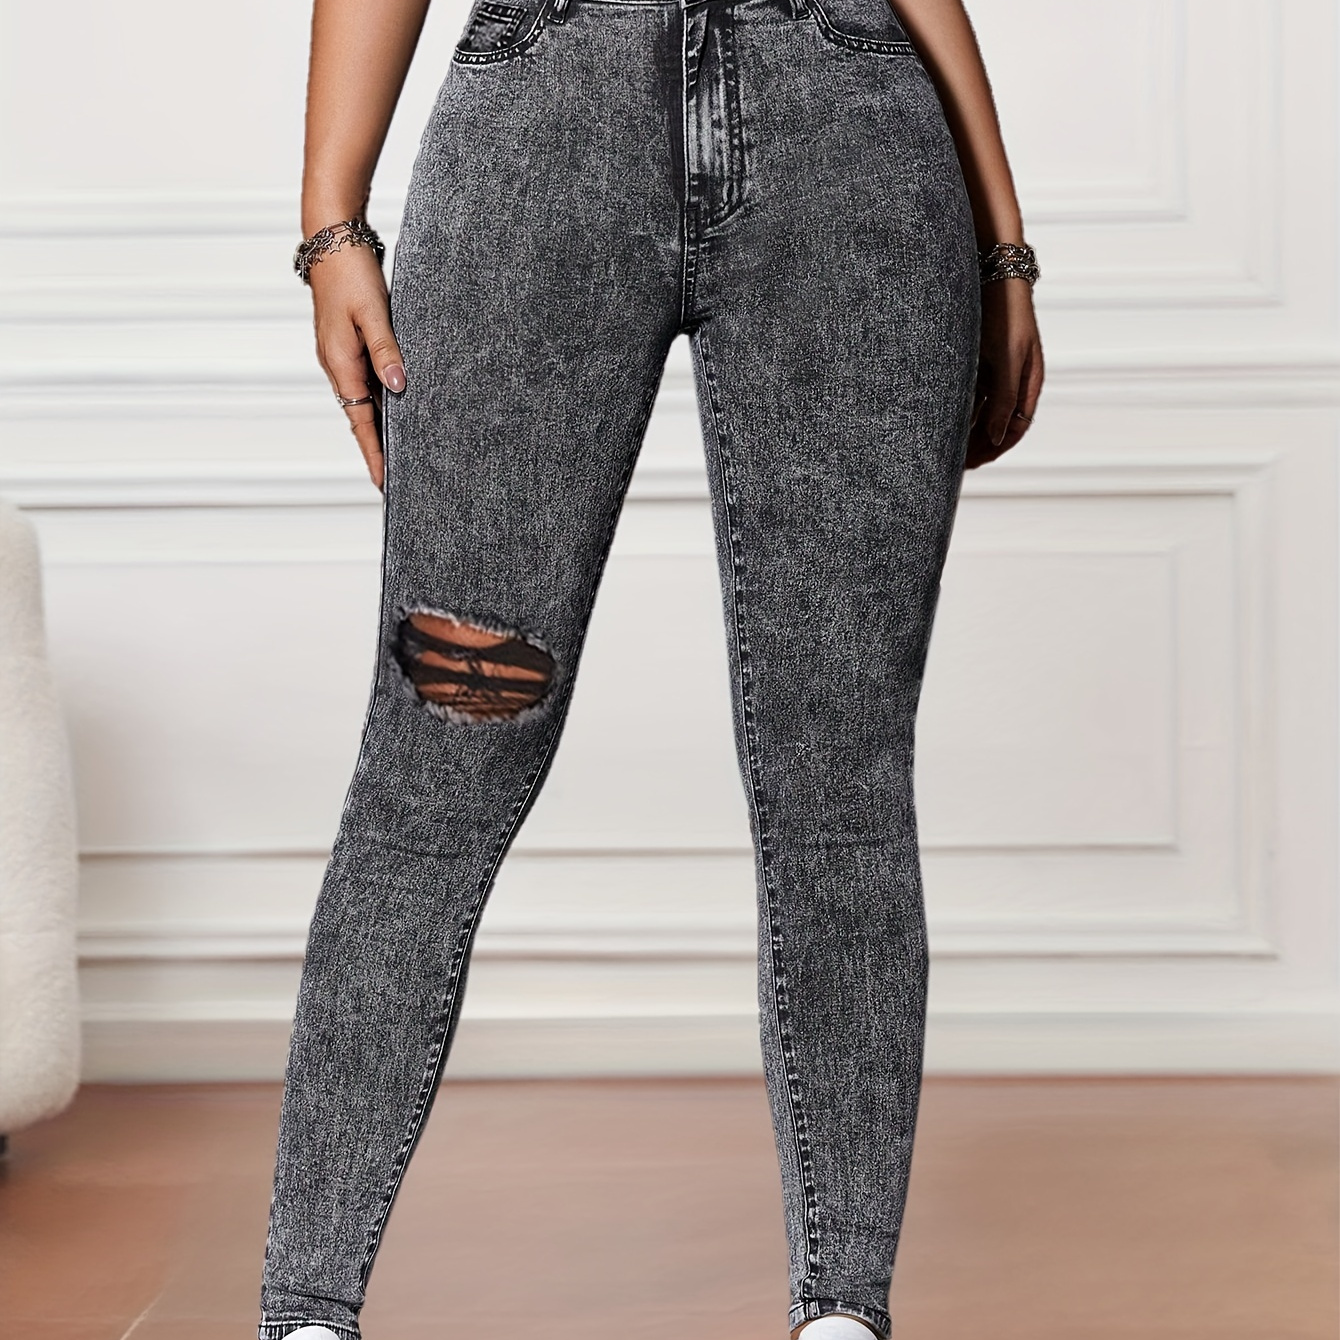 

Women's Black Color Wash Stretchy Skinny Jeans With Ripped Knee Detail, Casual Preppy Style Denim Pants